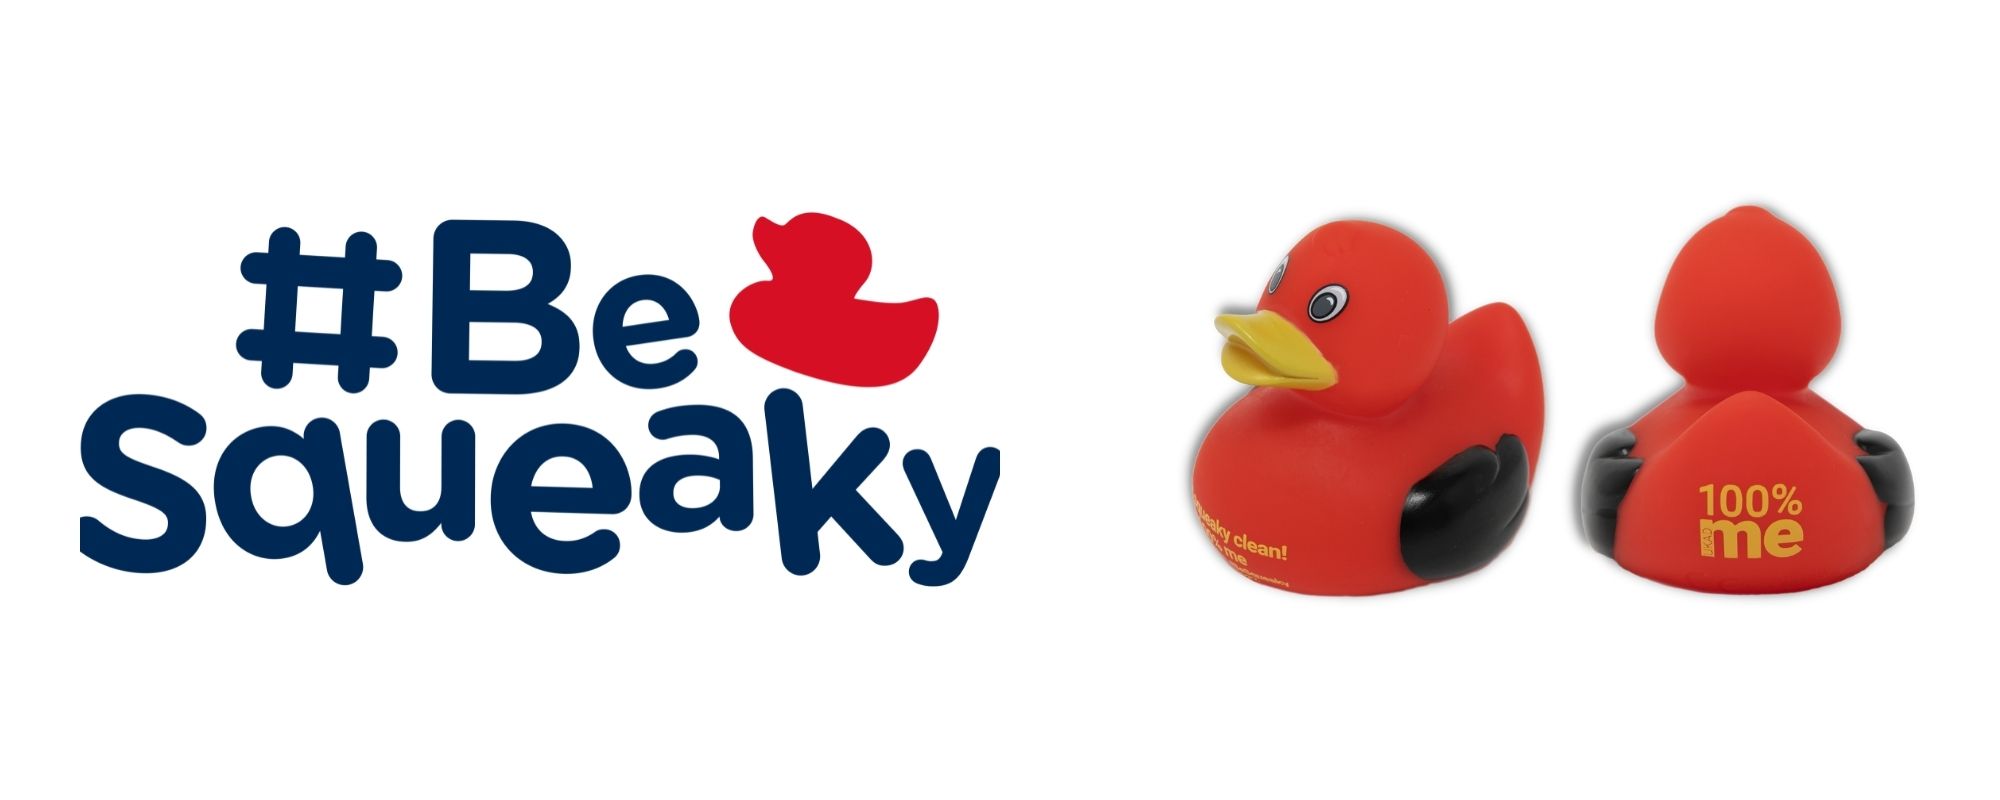 Be Squeaky hashtag and Squeaky the duck Beijing 2022